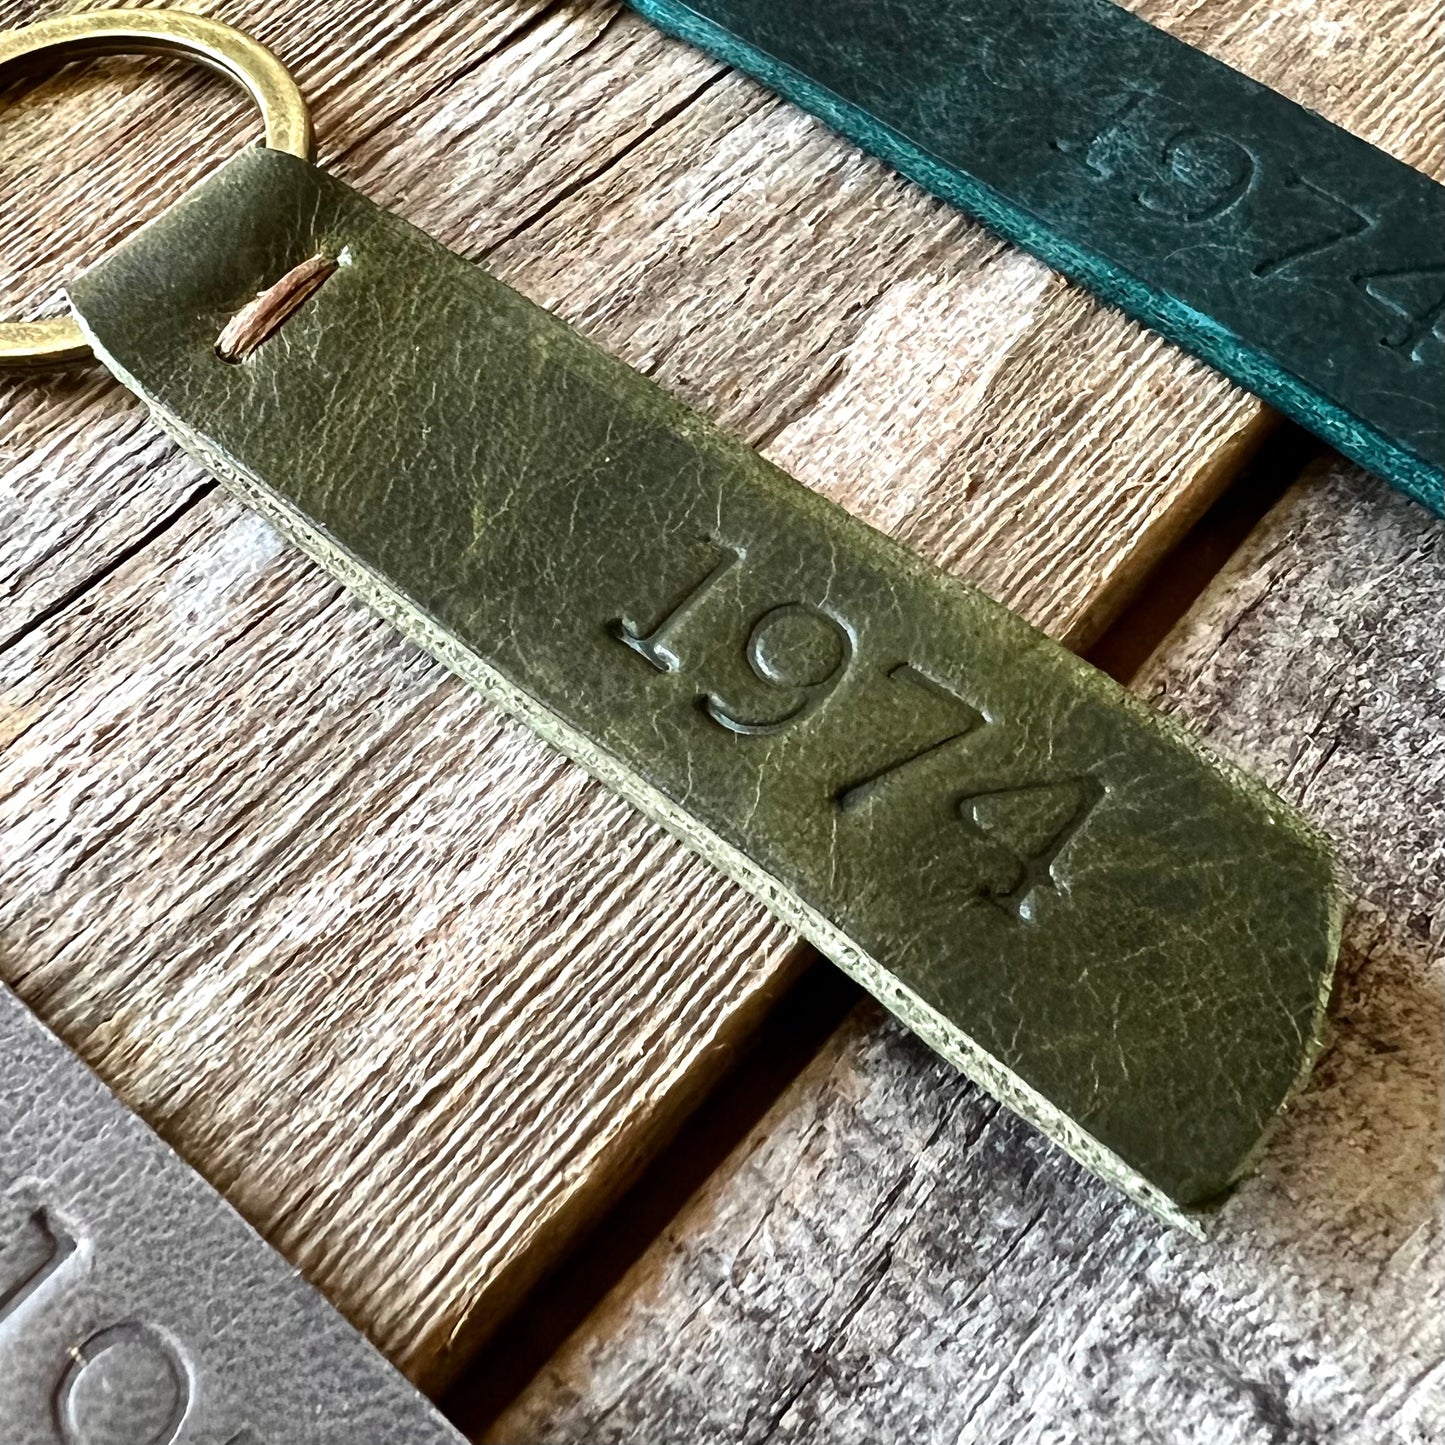 1974 Branded Leather Key Fob in Forest